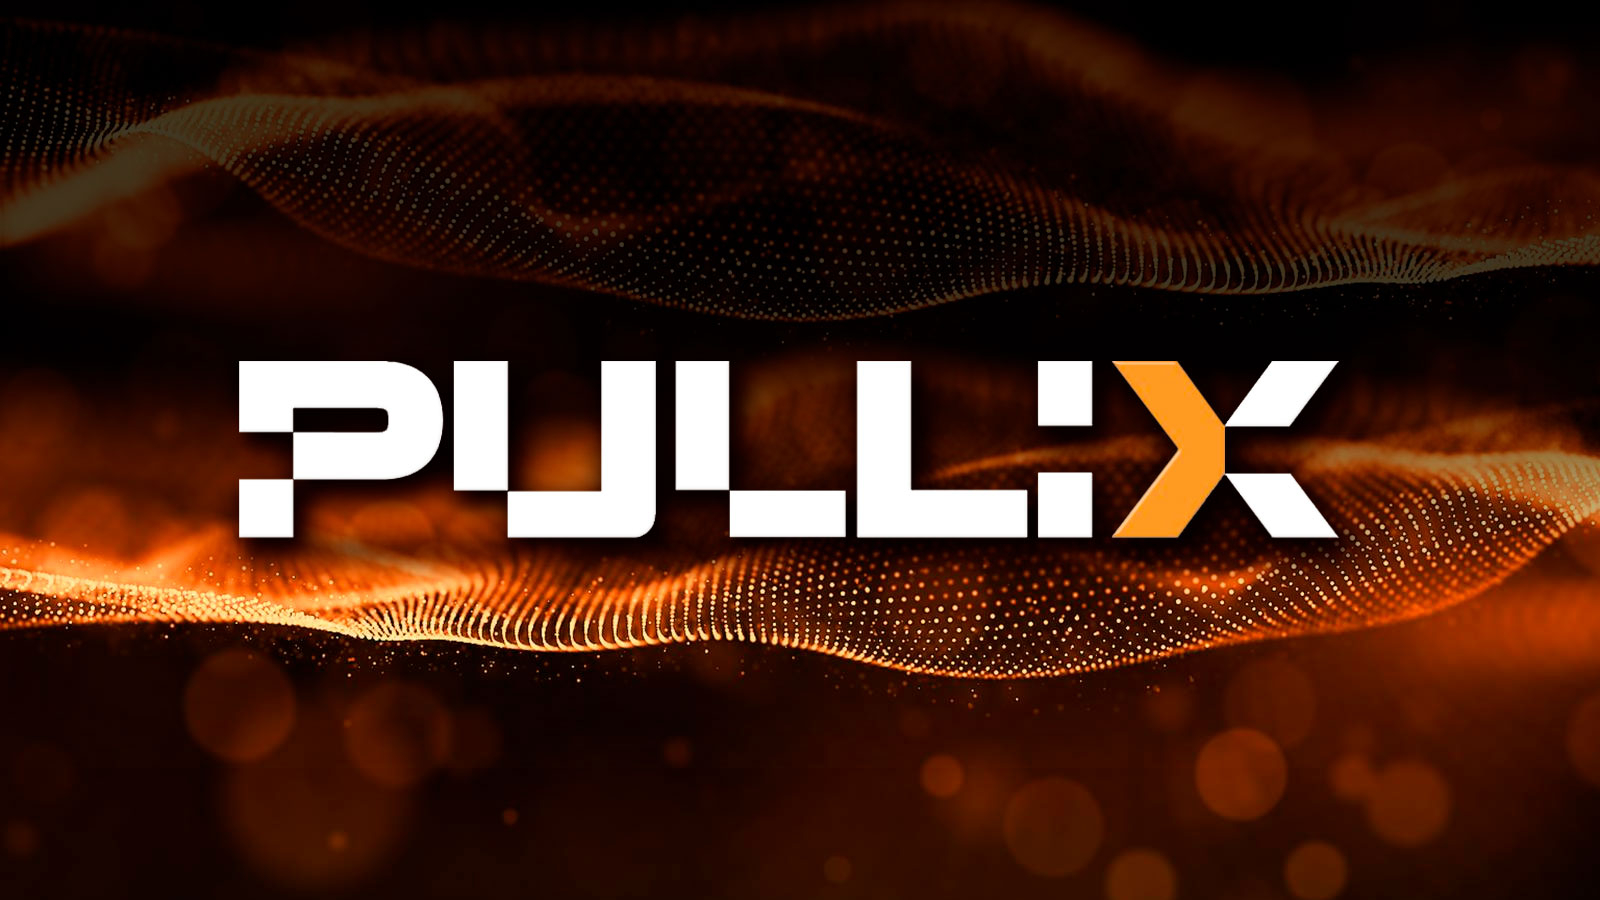 Pullix (PLX) Coin Sale Campaign Welcomes Altcoiners Now, since XRP and Cardano (ADA) Assets Gaining Value